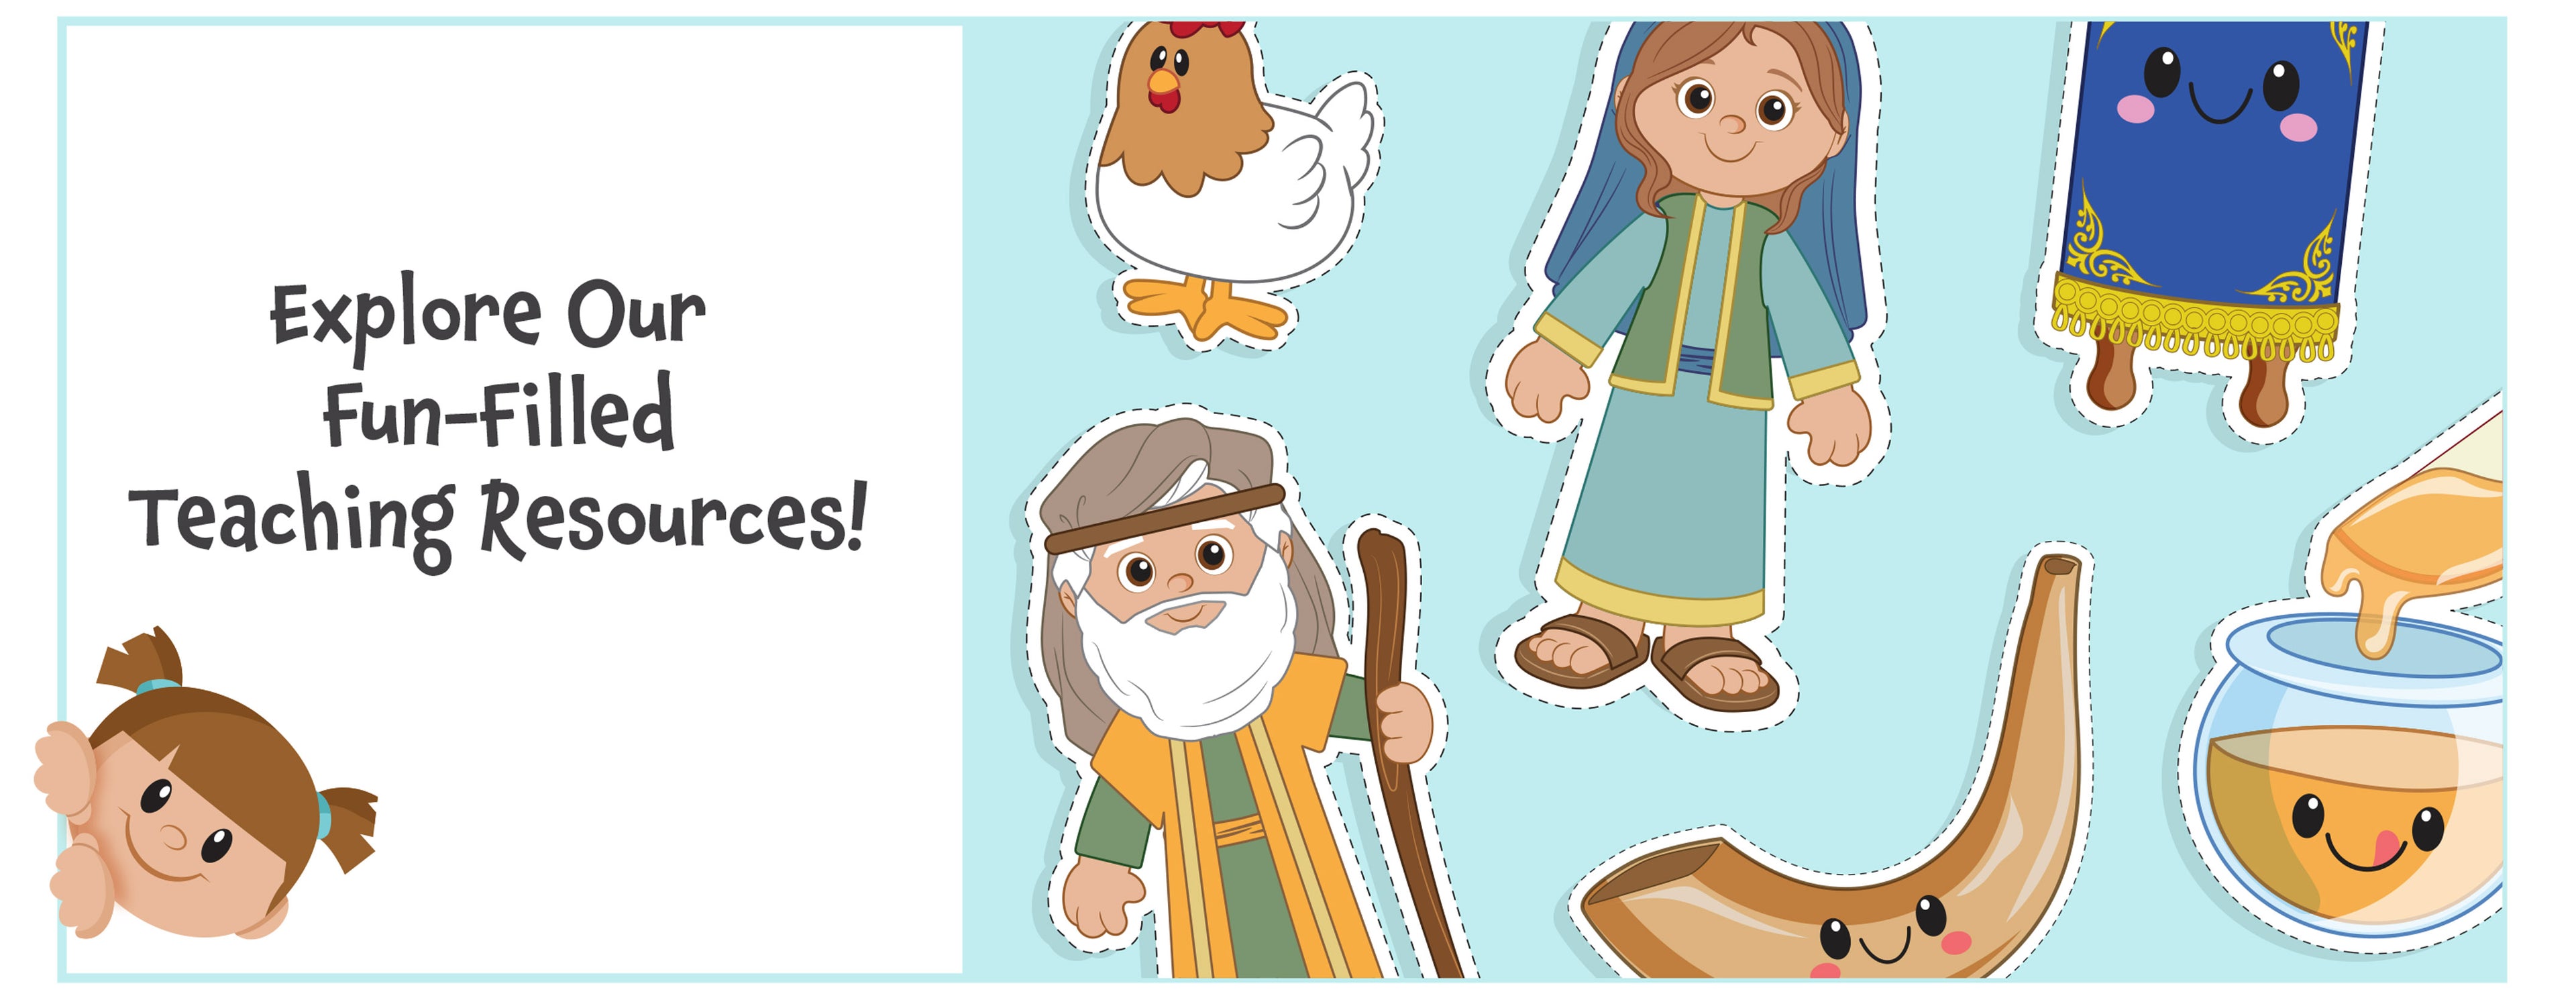 Adorable Parshah puppets! Amazing resource to serve as teaching aids to enhance teaching parshah (weekly Torah portion) holiday and yomtov curriculum. Ideal for preschool and early childhood education.